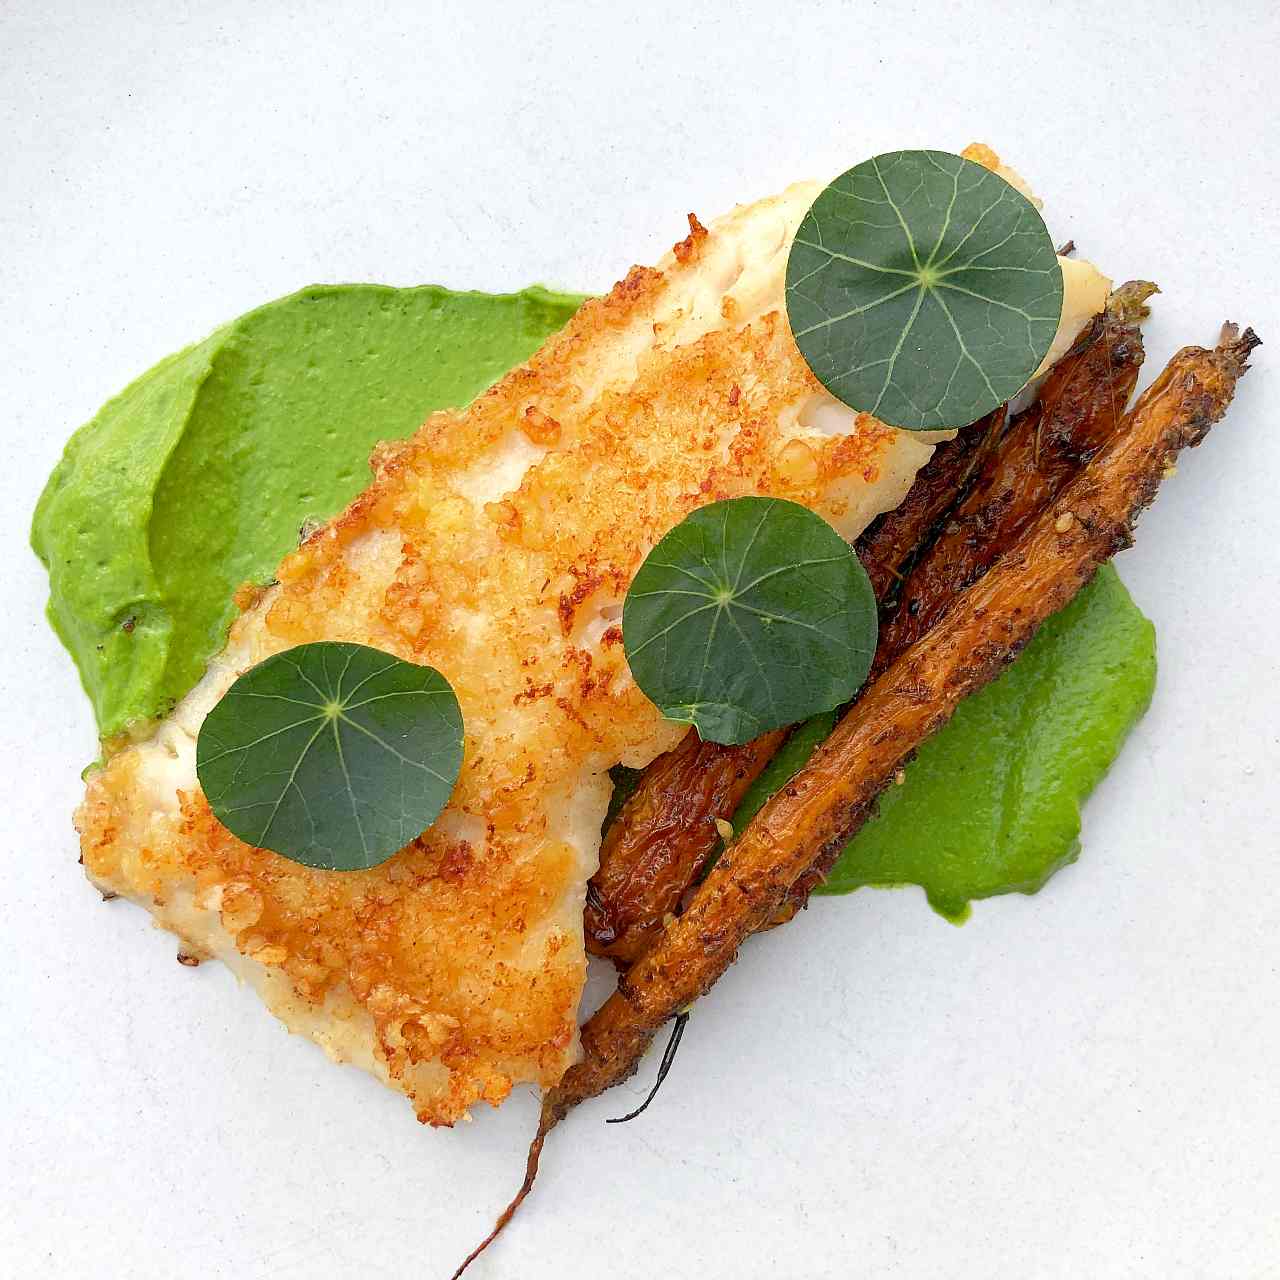 Pacific Rockfish recipe and Nasturtiums and carrots